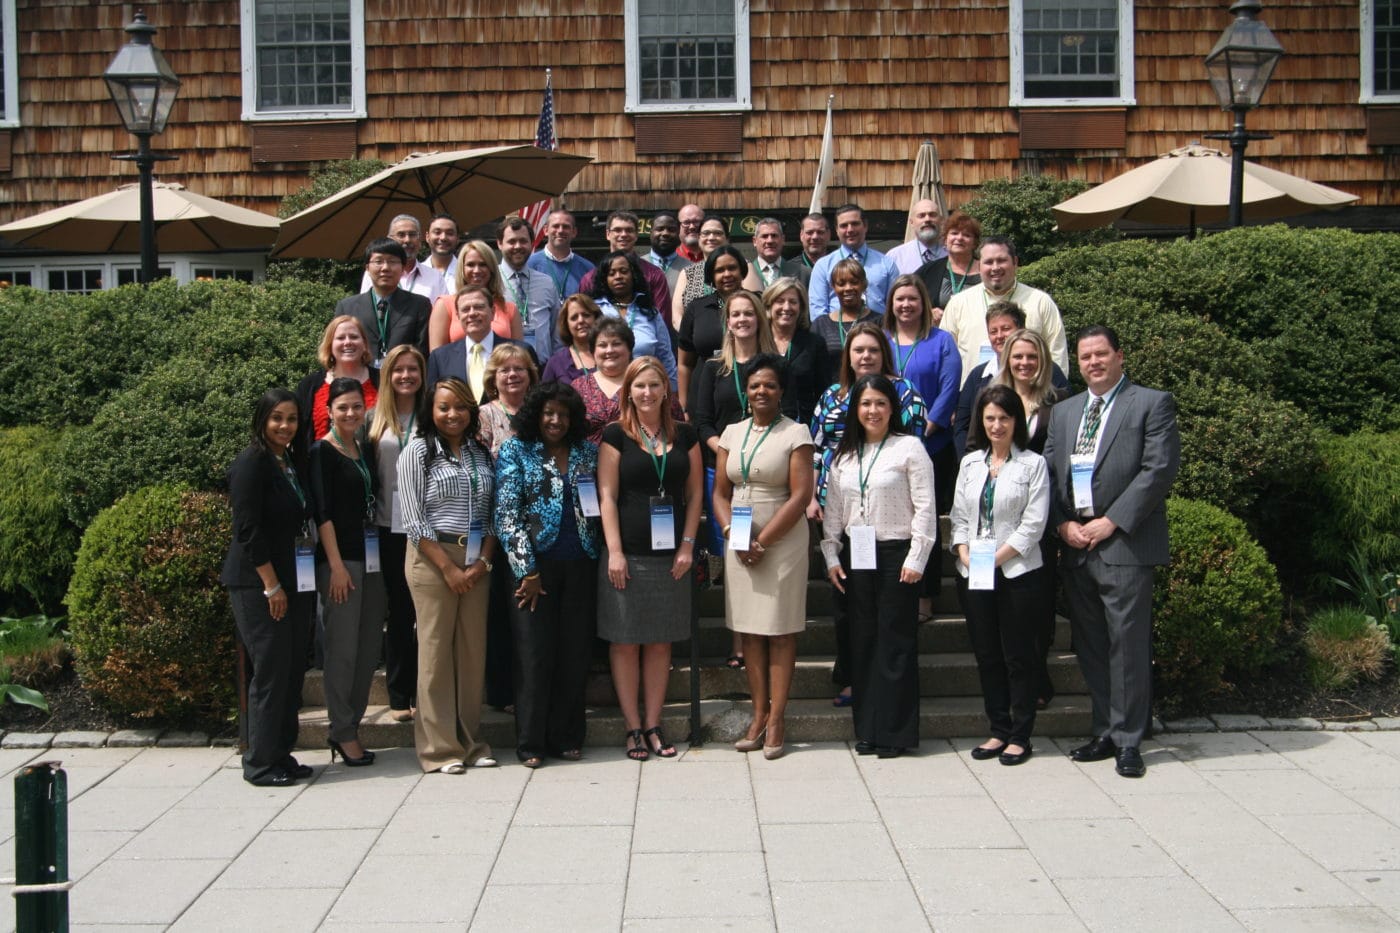 May, 2014 - Some key Community Options' staff members from across the country pose for a photo at the 8th annual iMatter Conference in Princeton, NJ.